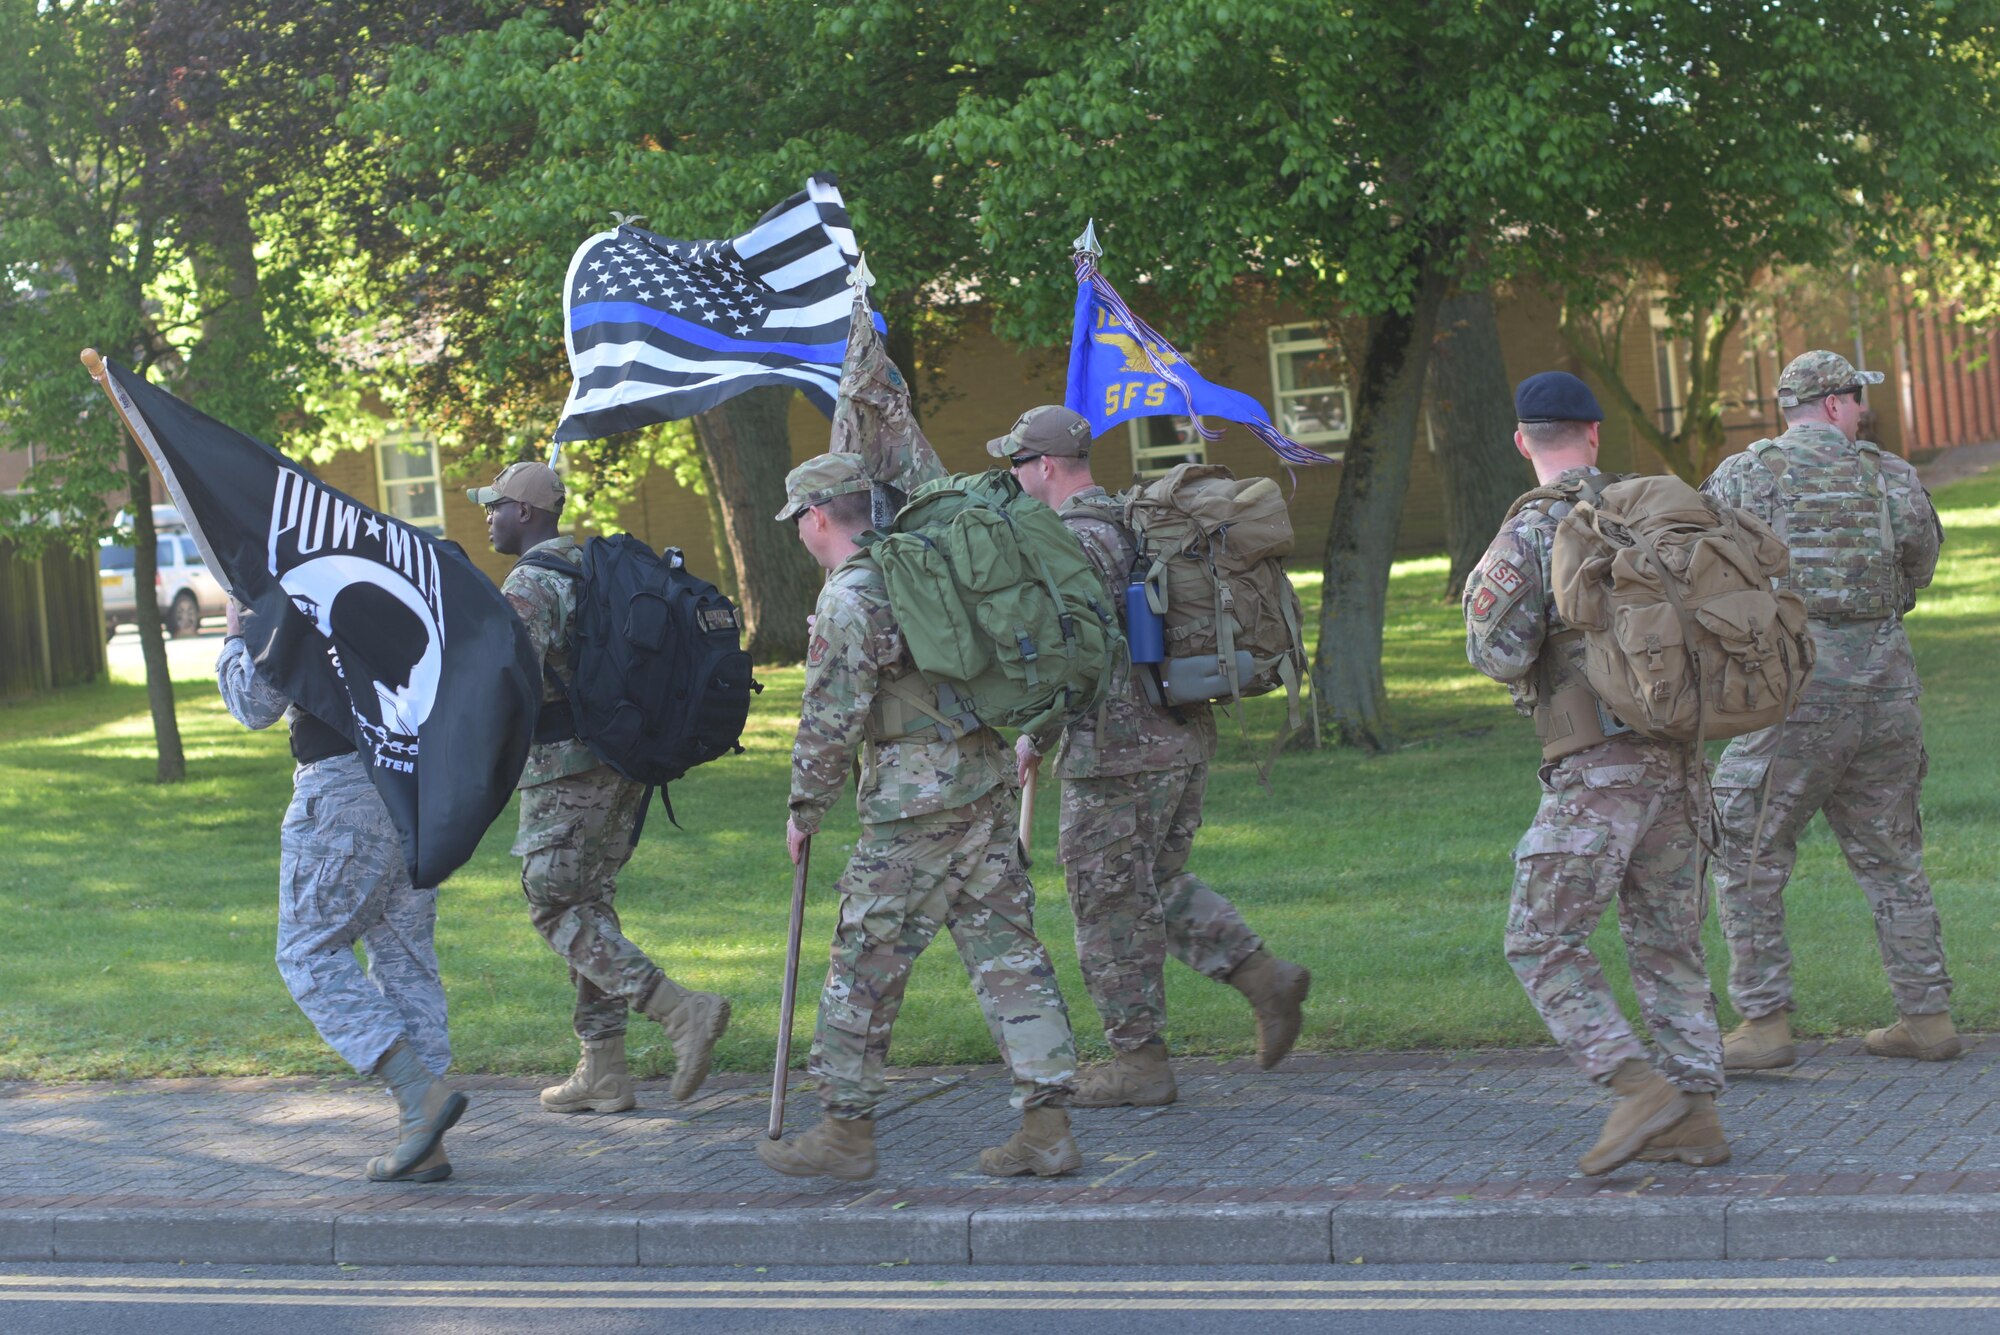 Members of the 100th and 48th Security Forces Squadrons participate in a ruck march at RAF Mildenhall, England, May 13, 2019. The week of May 15, is designated National Police Week and honors fallen law enforcement officers. (U.S. Air Force photo by Senior Airman Benjamin Cooper)